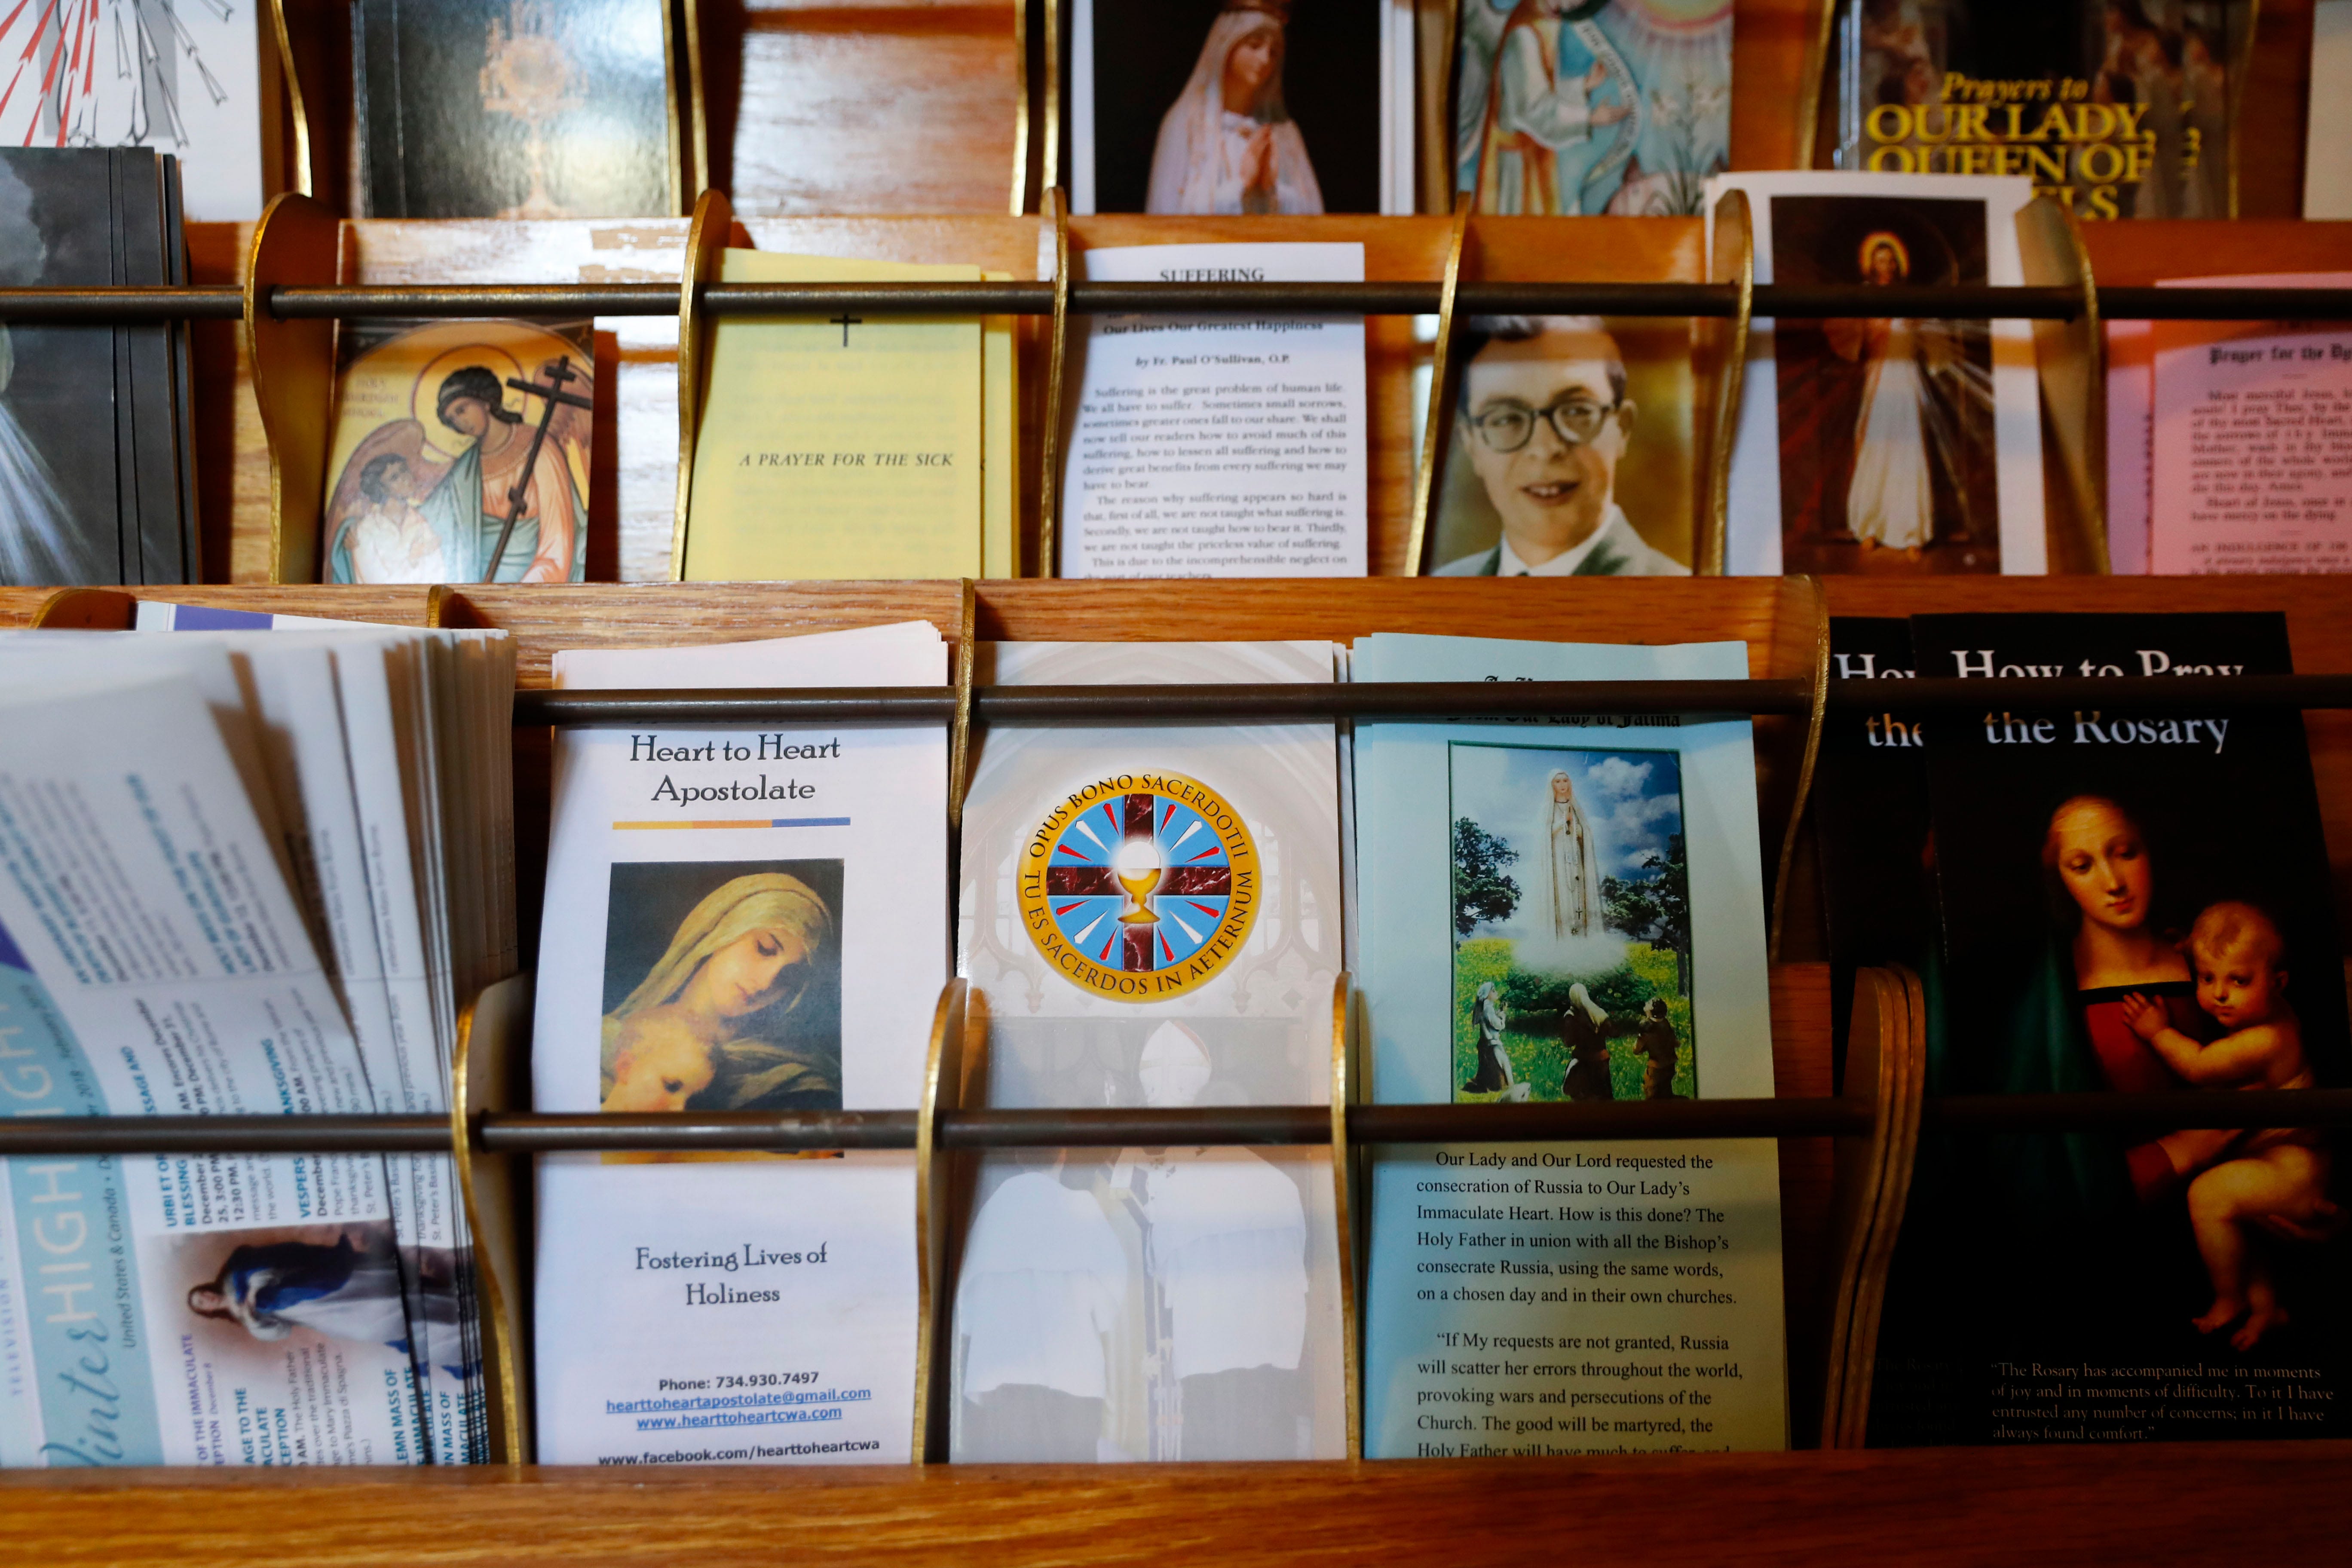 Informational pamphlets for Opus Bono Sacerdotii are displayed with others at The Assumption of the Blessed Virgin Mary Church in Detroit on June 7.